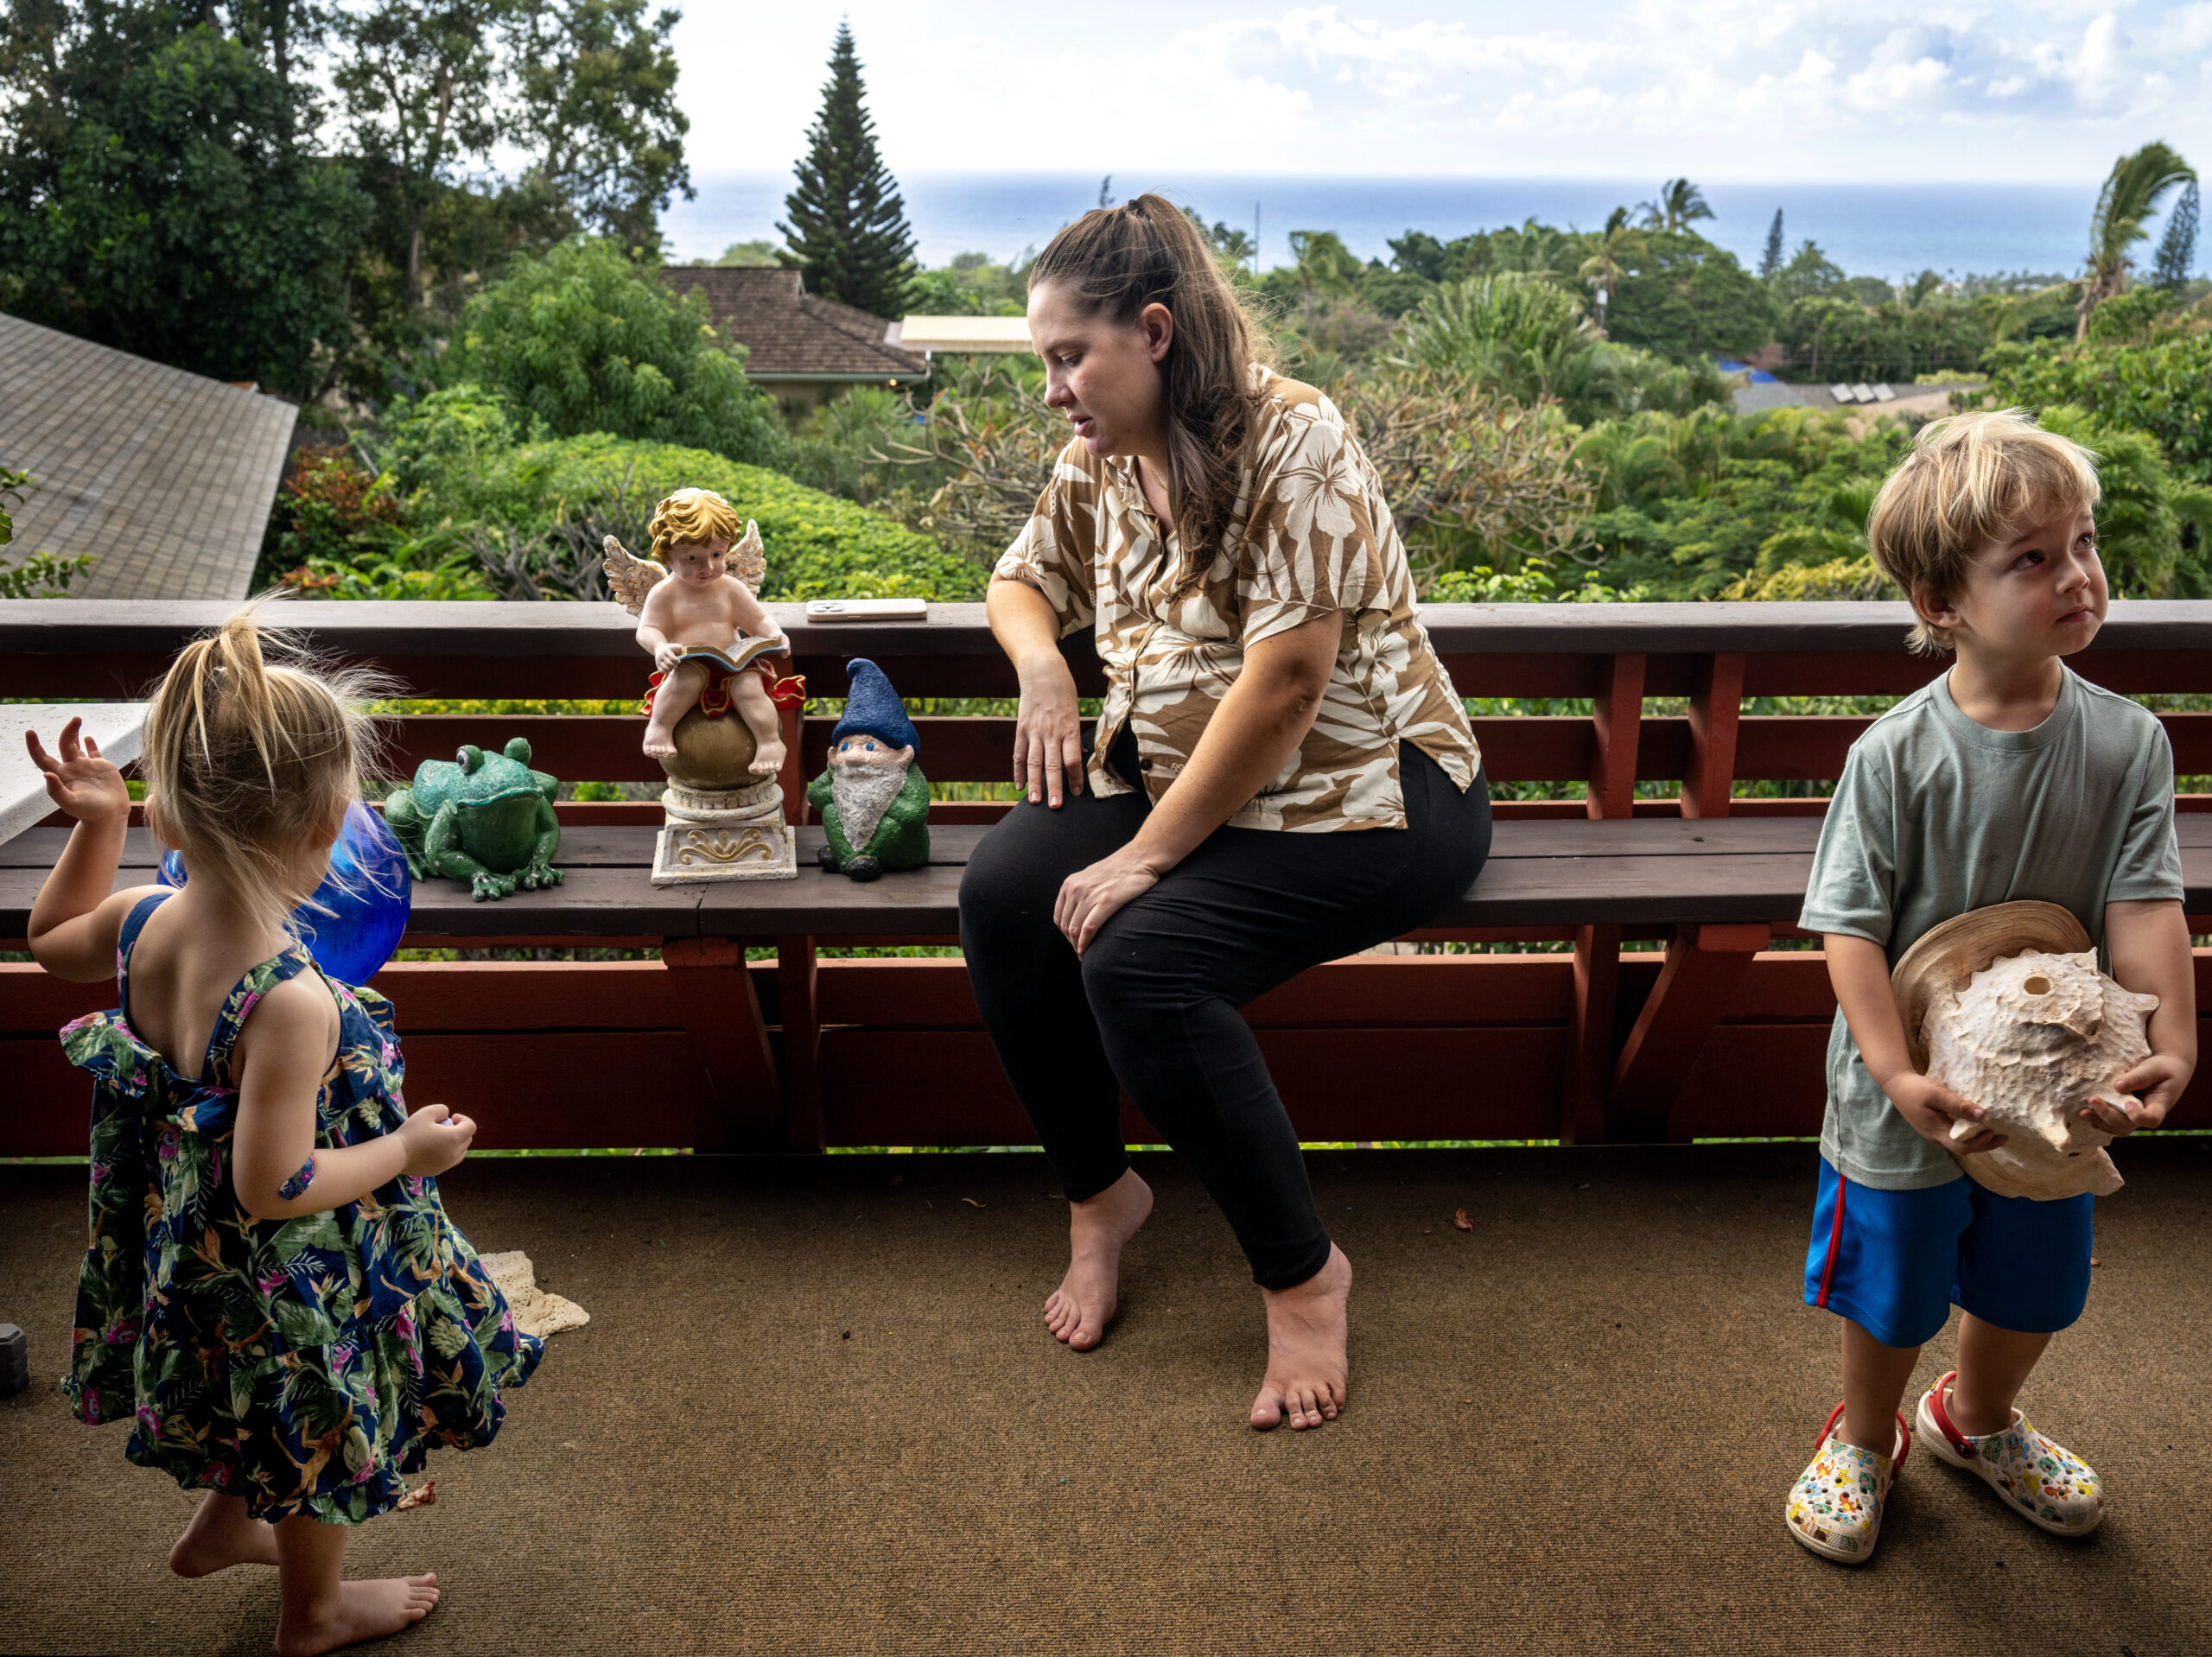 Maui fire survivors struggle to find long-term housing, half a year after the blazes